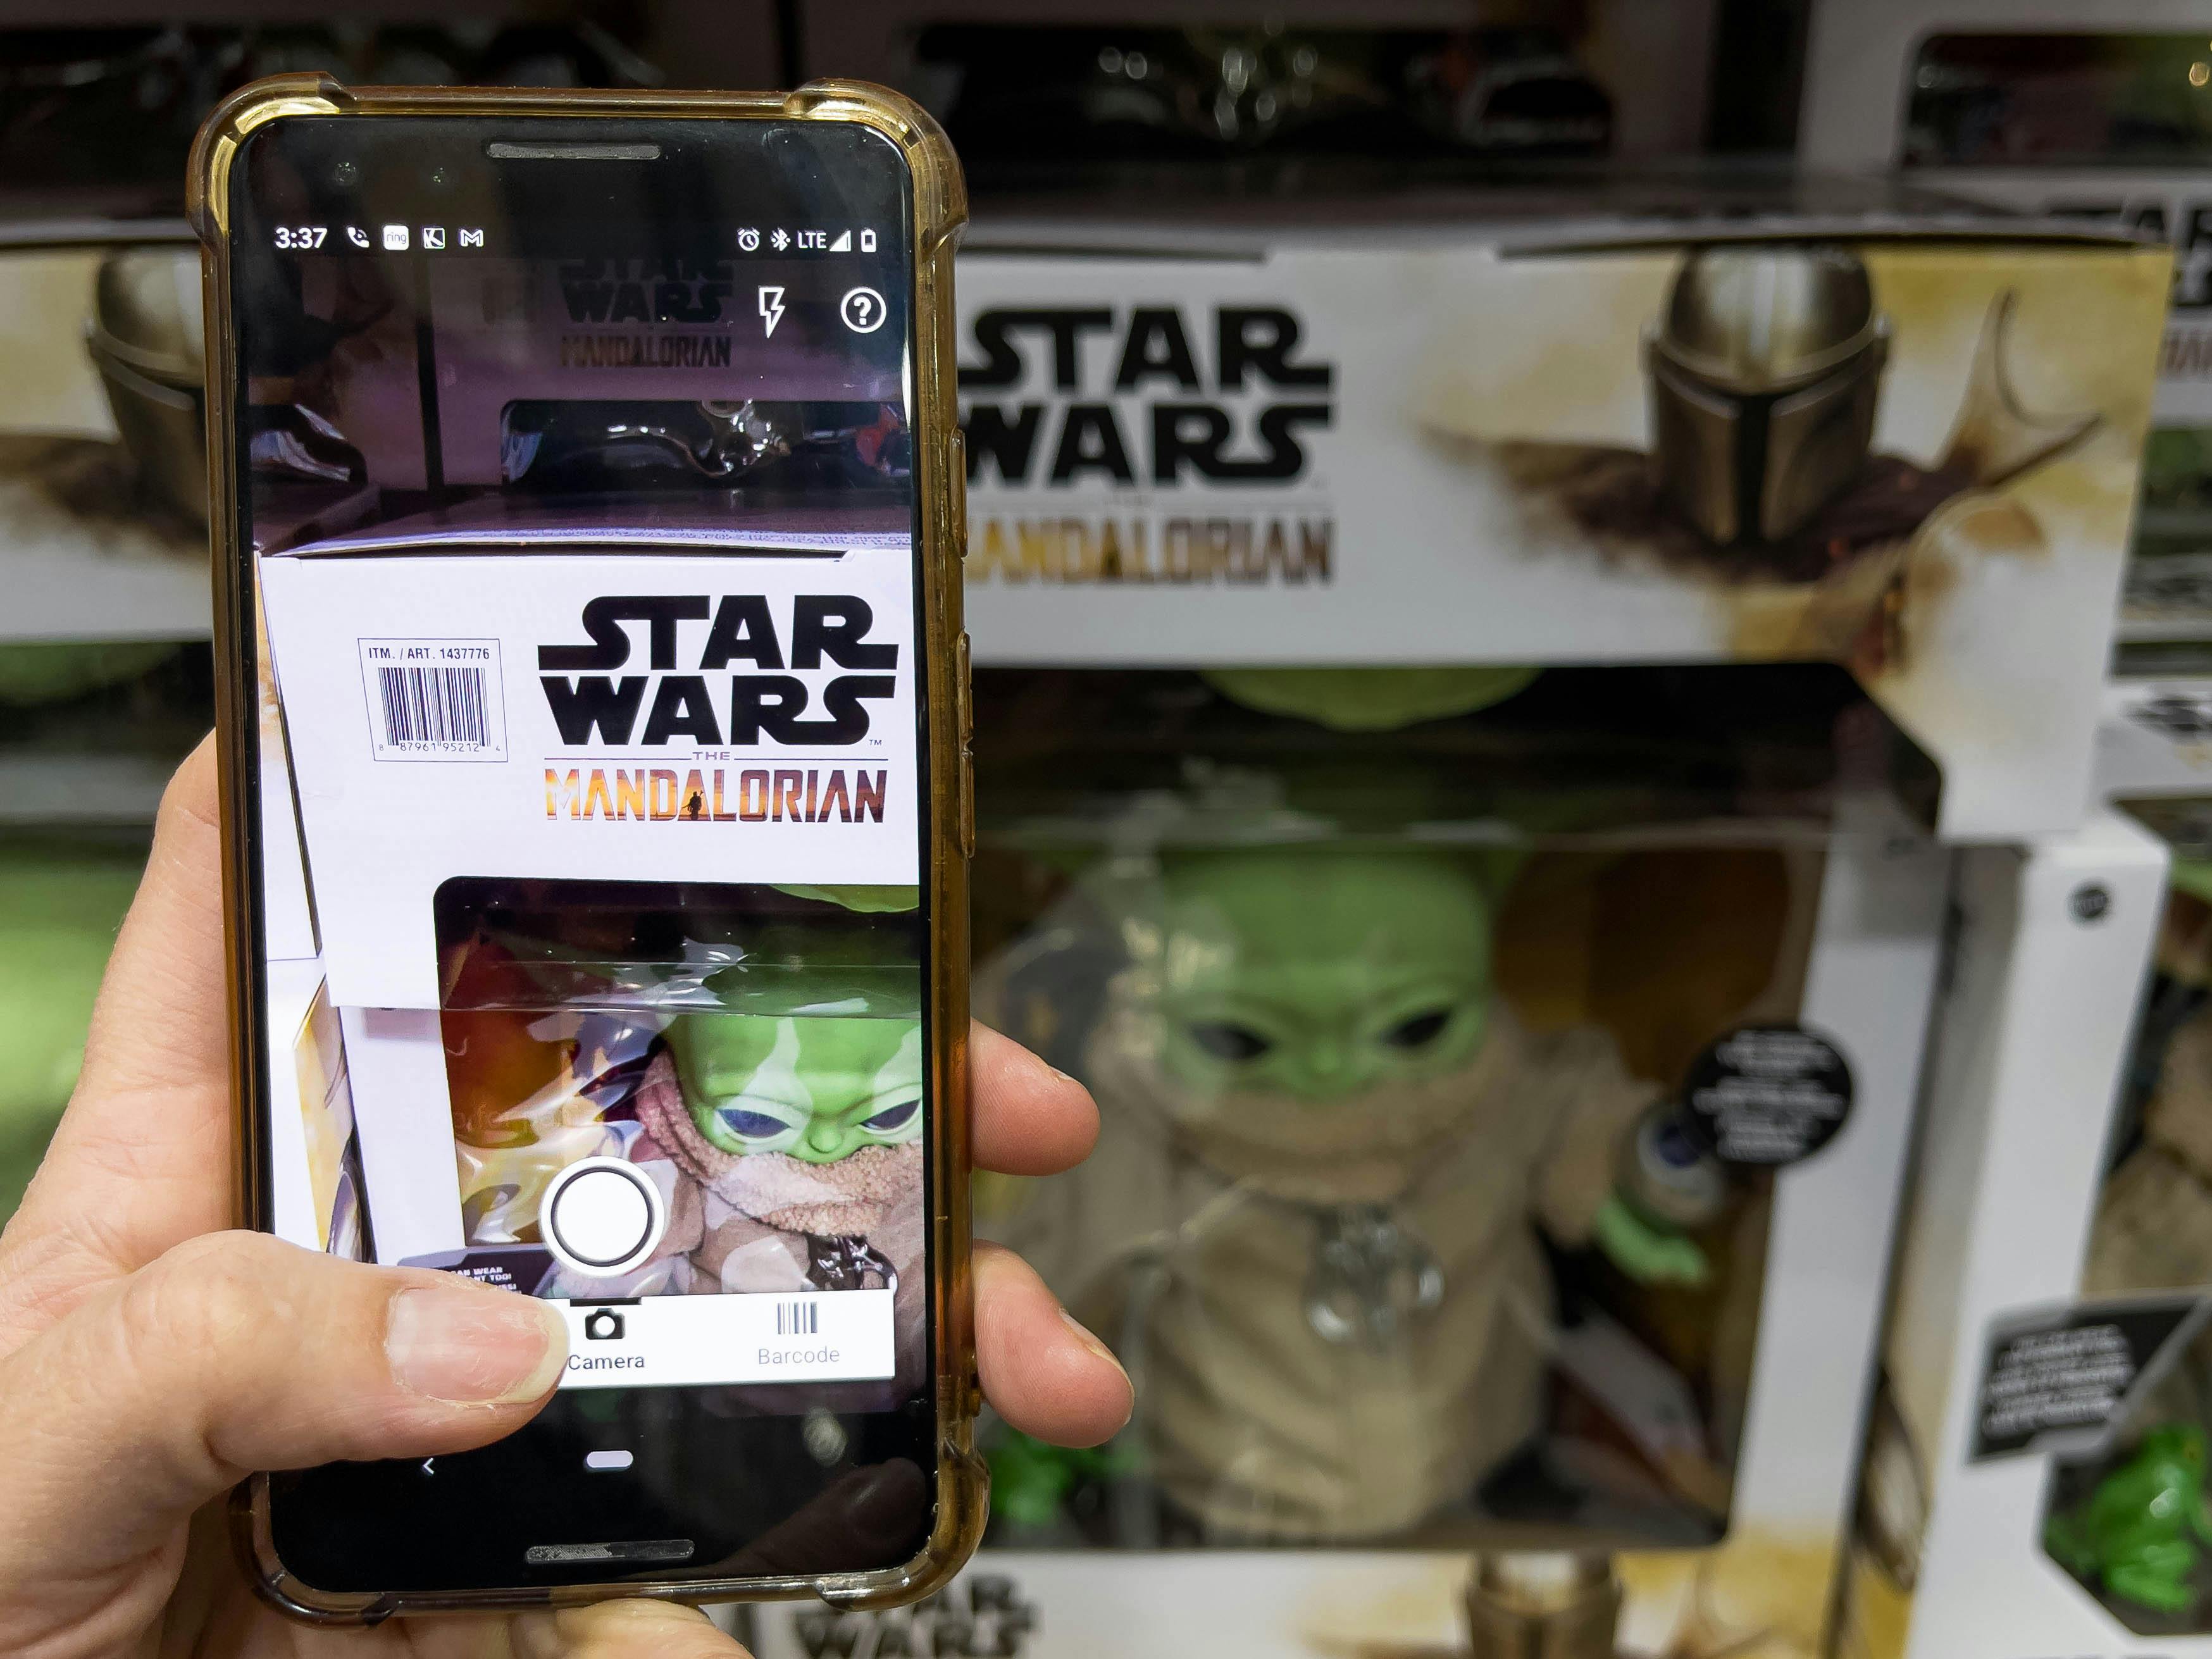 A person scanning a Star Wars Mandalorian toy with the amazon app